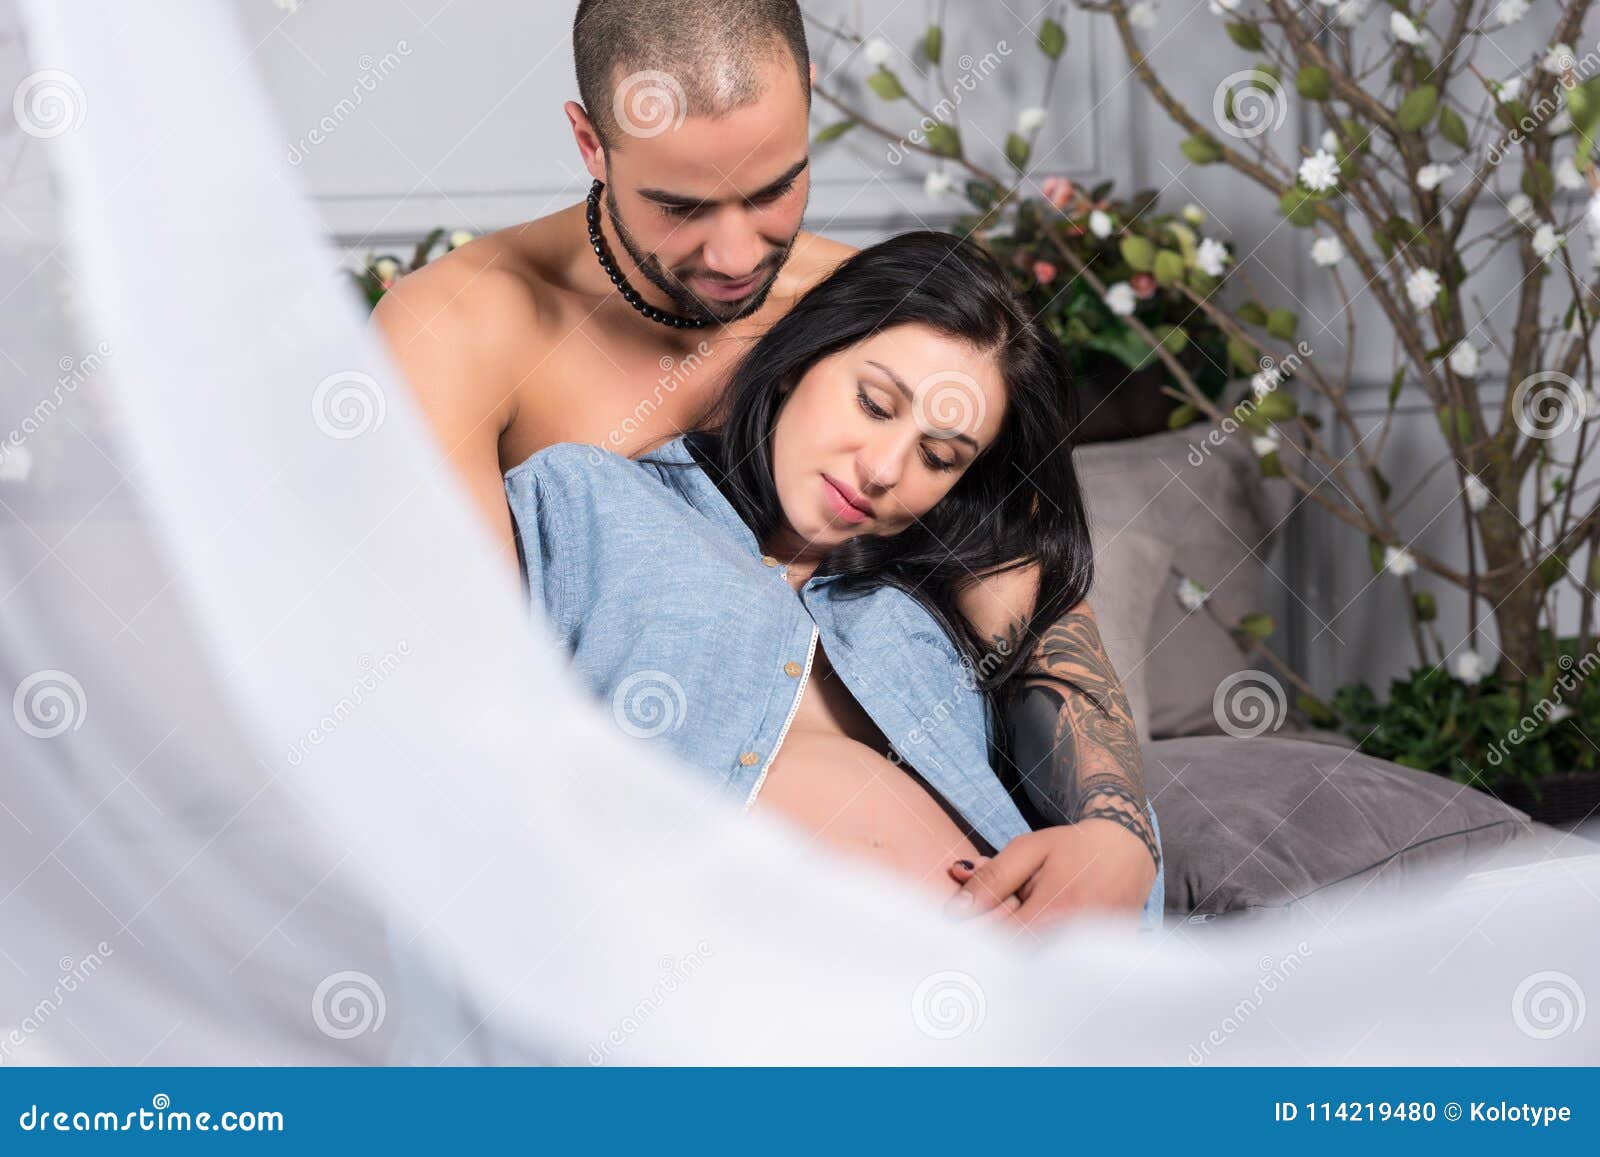 Handsome man on bed stock photo. Image of chest, lying 